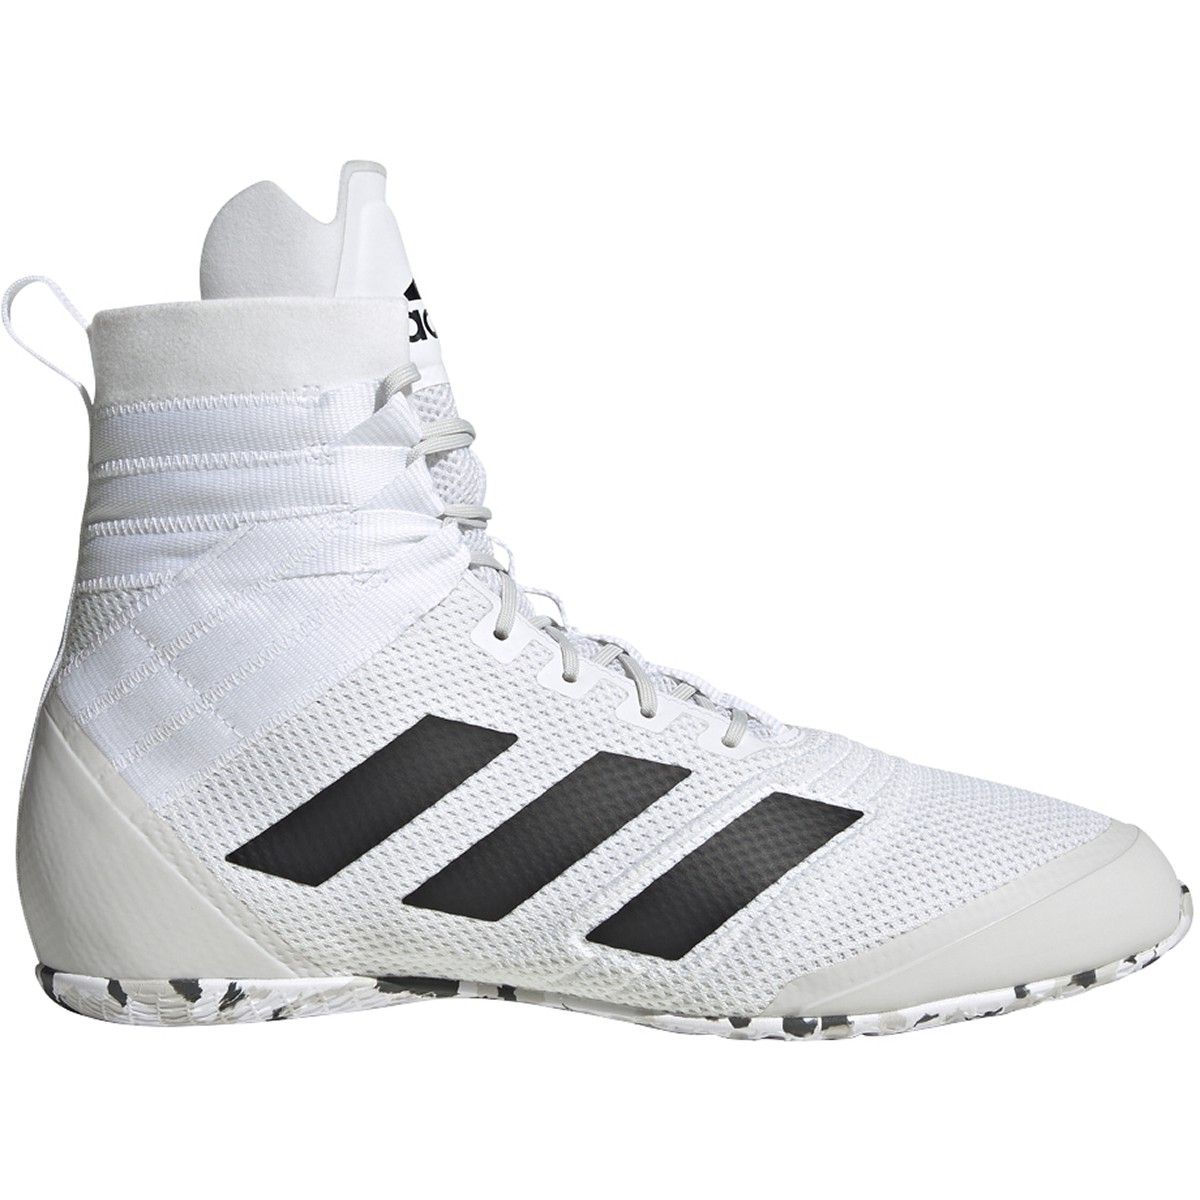 Adidas Boxing Shoes adiSTAR 011959 from Gaponez Sport Gear